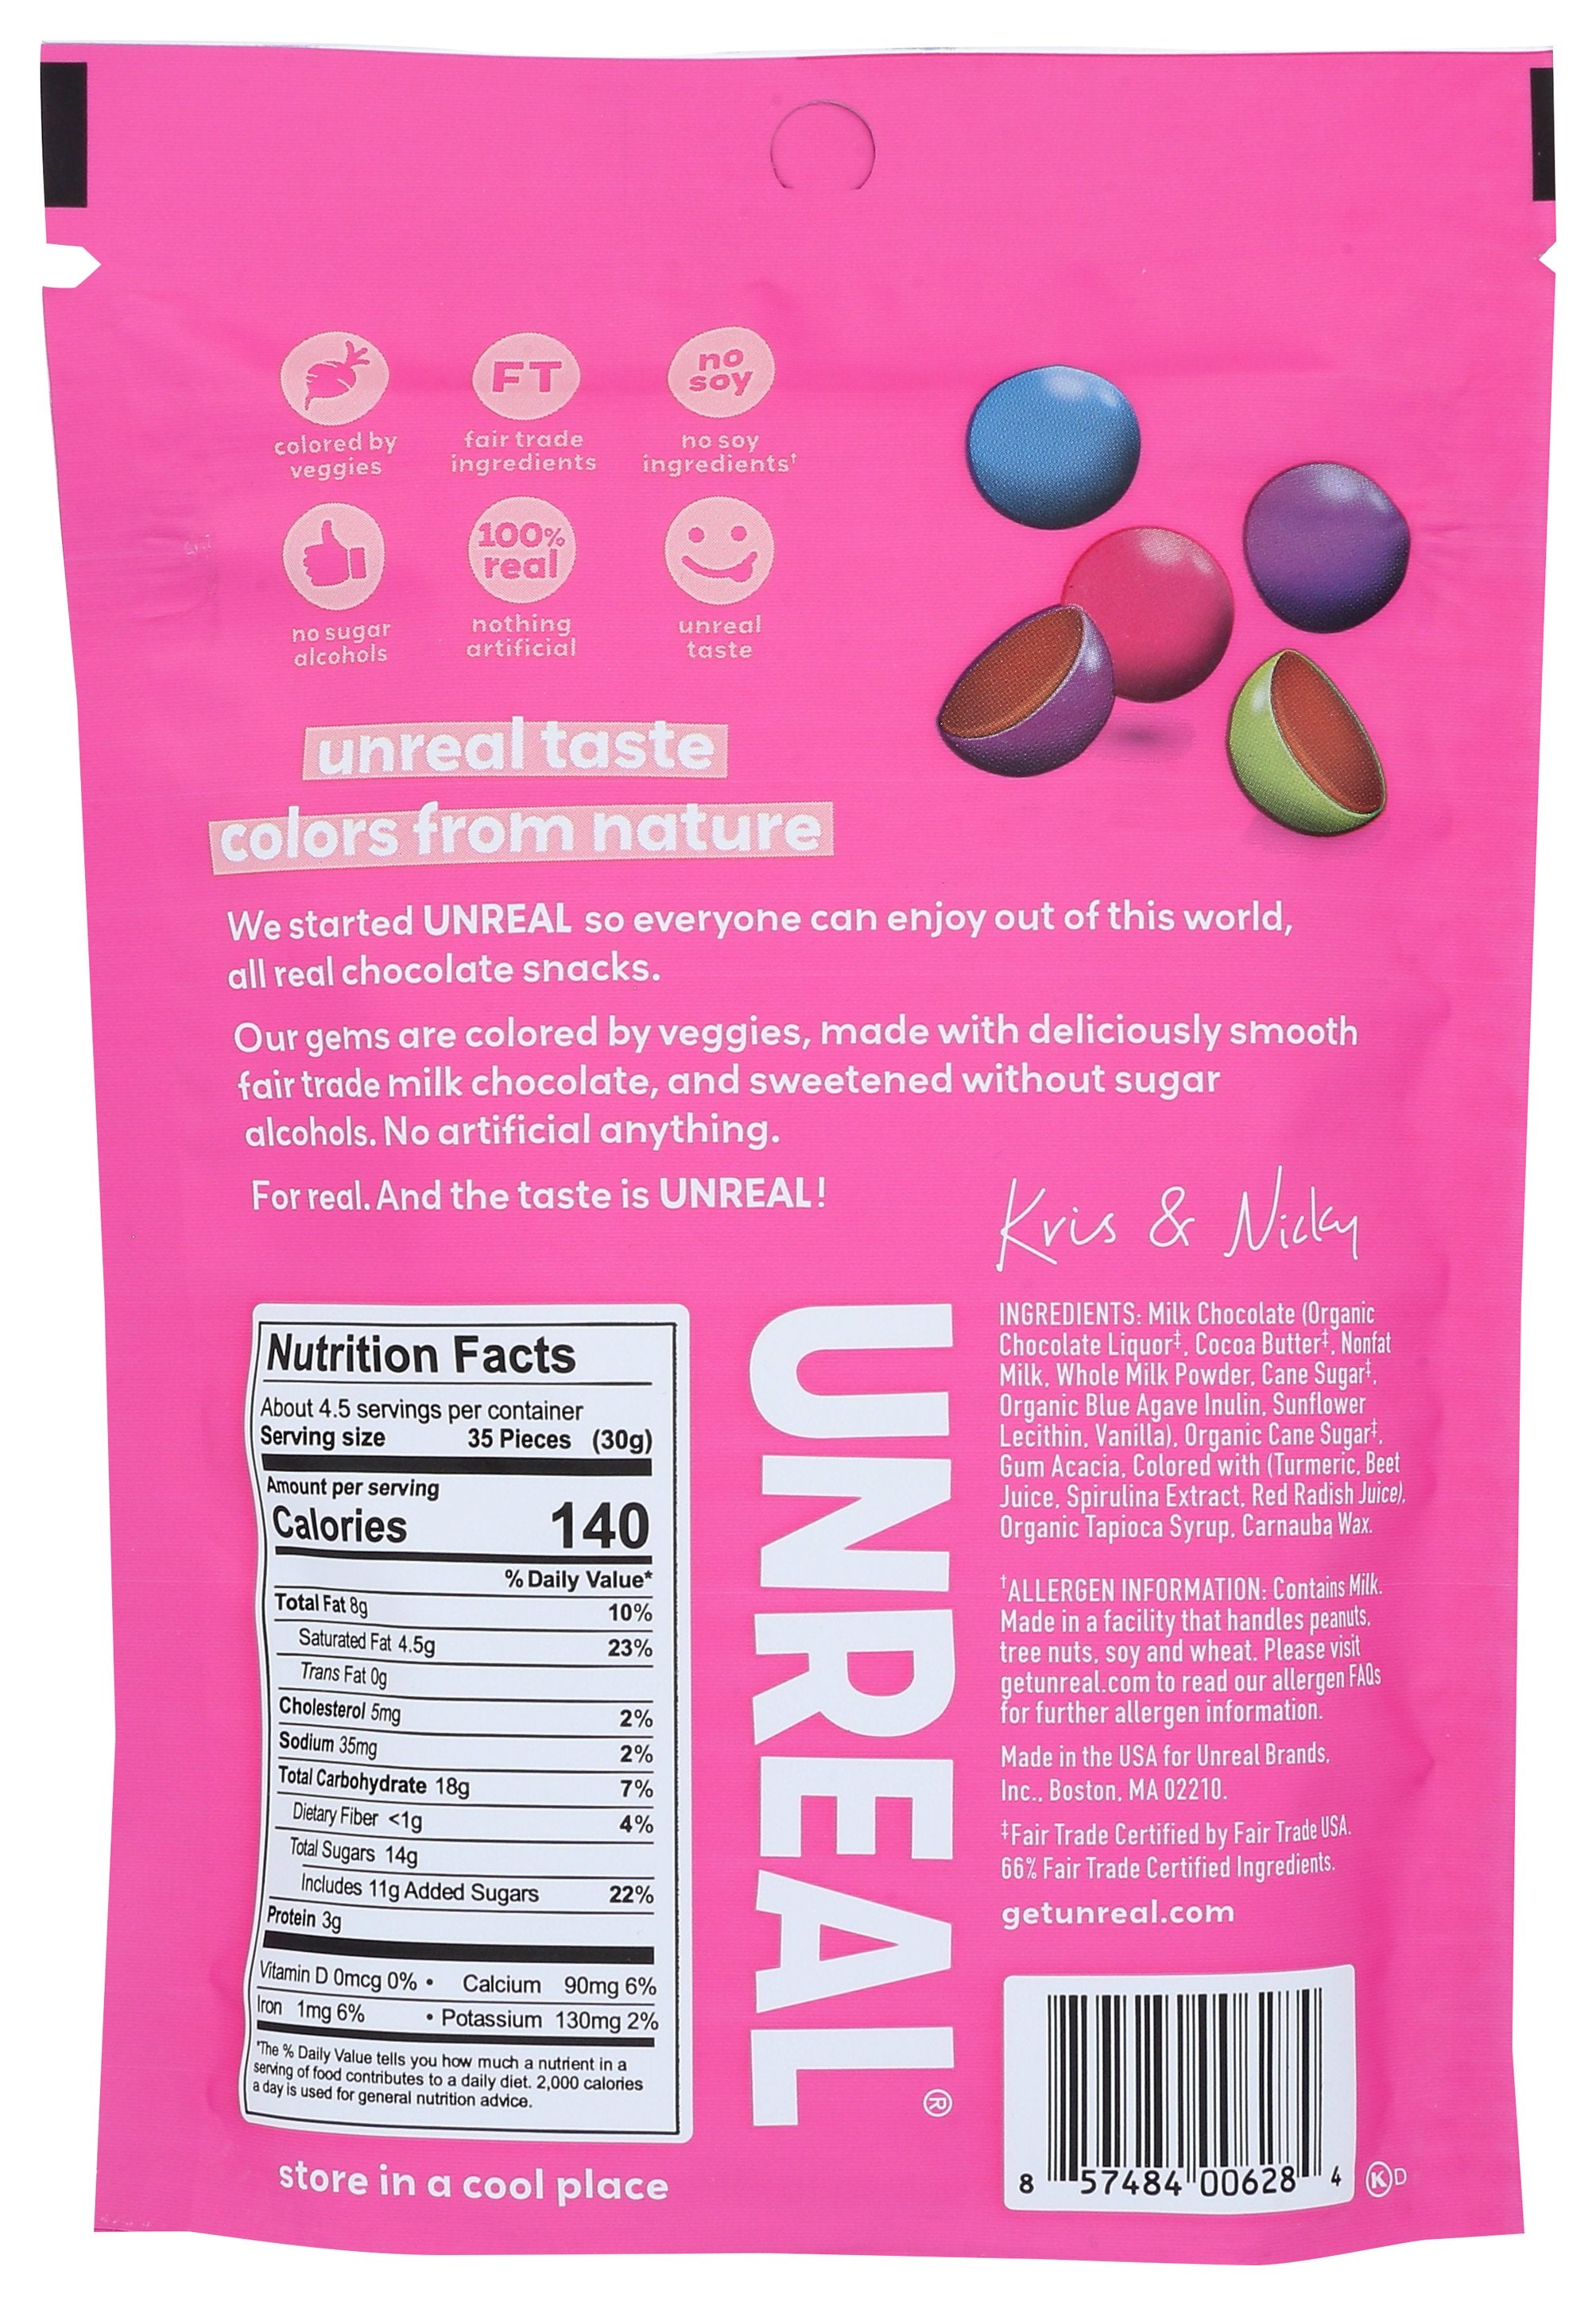 UNREAL CHOC CANDY COATED - Case of 6